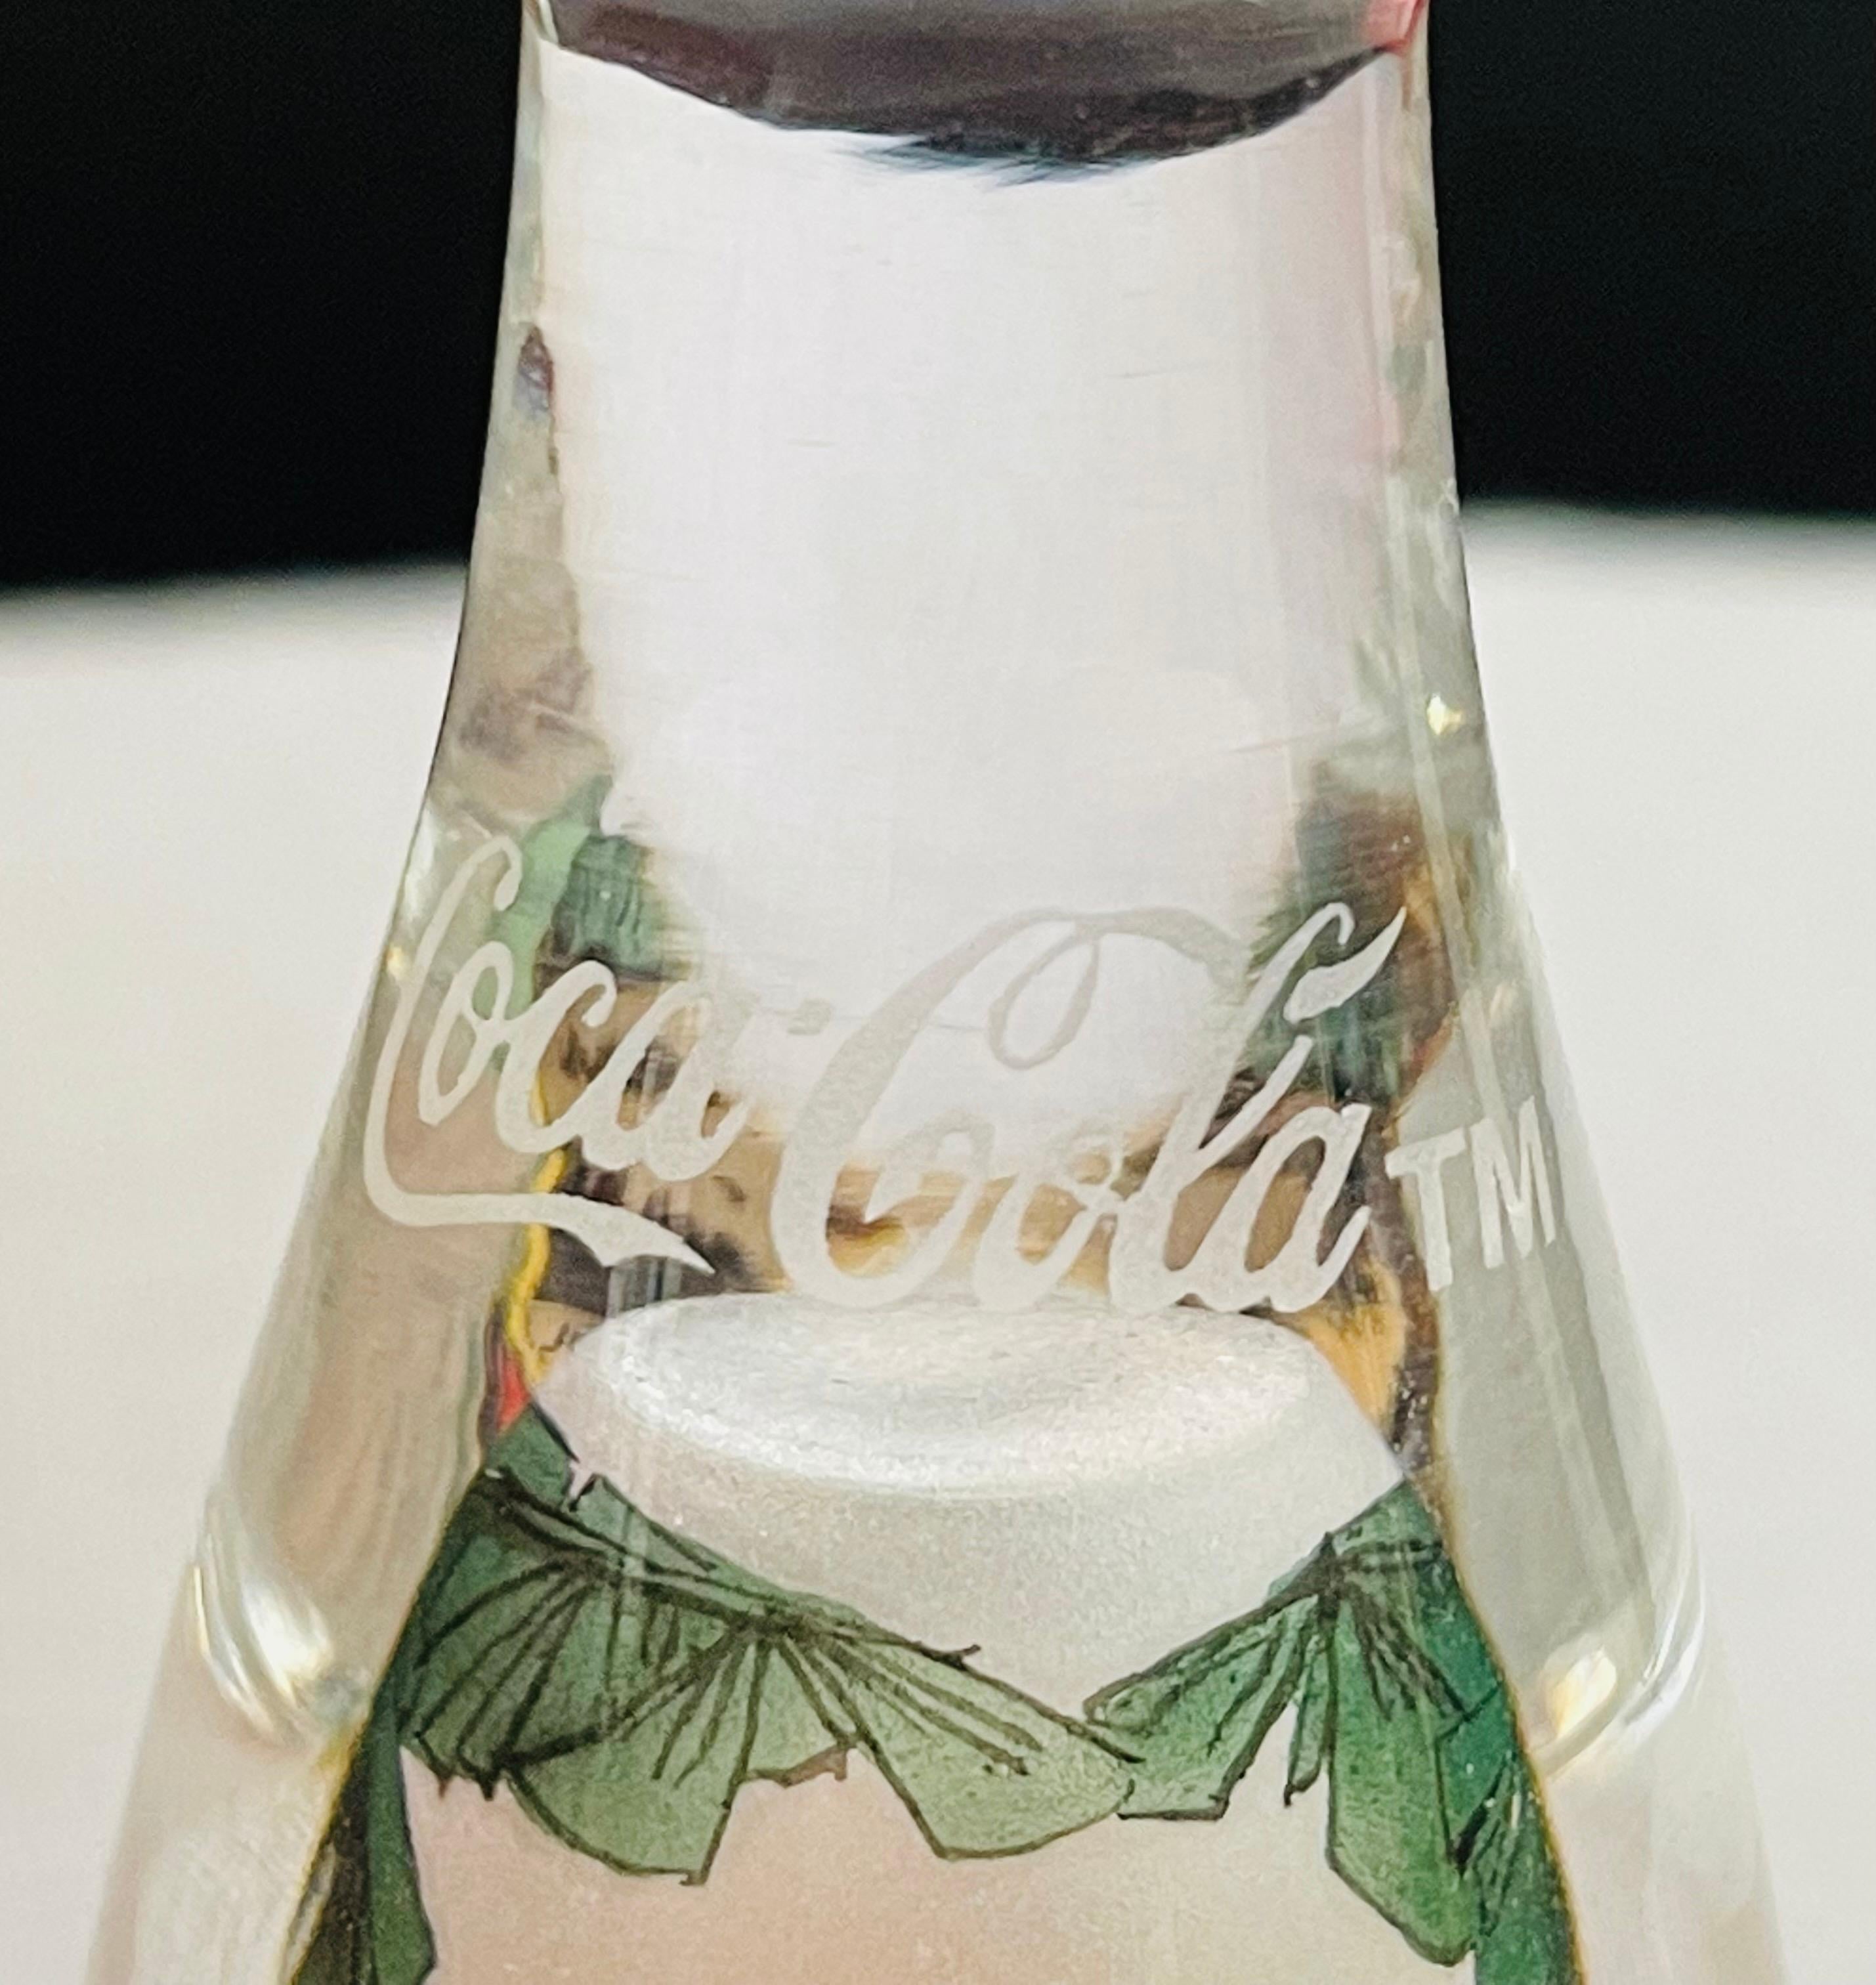 Collectible Coca-Cola Special Edition Asian Chinese Bottles, a Set of 5 For Sale 11